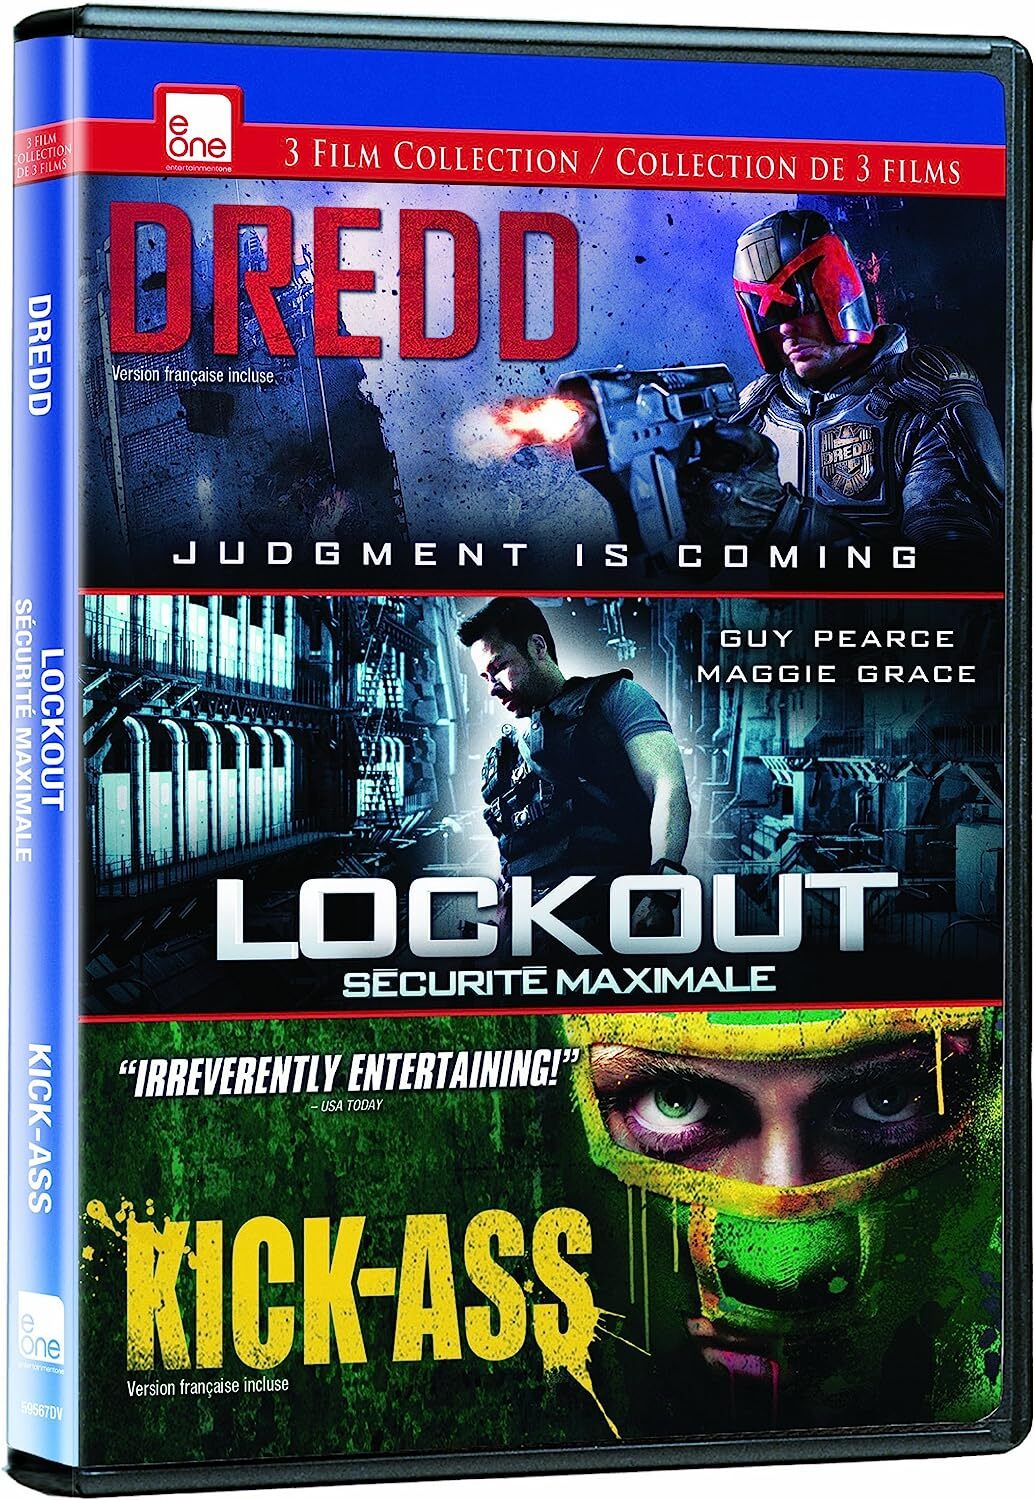 Lockout (2012) dvd movie cover